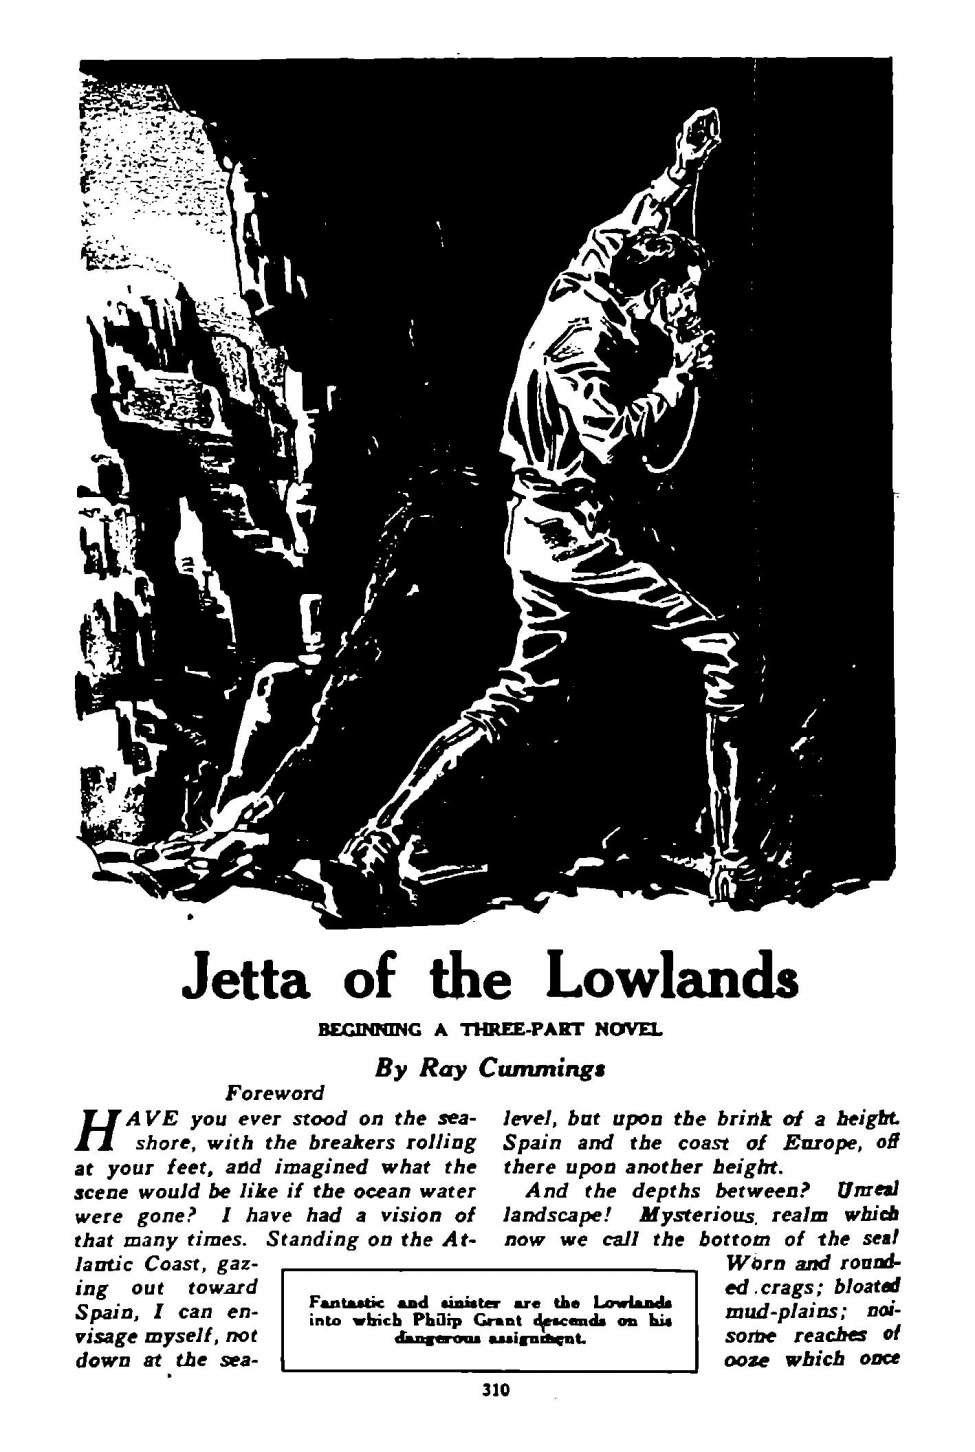 Book Cover For Astounding Serial - Jetta of the Lowlands - R Cummings